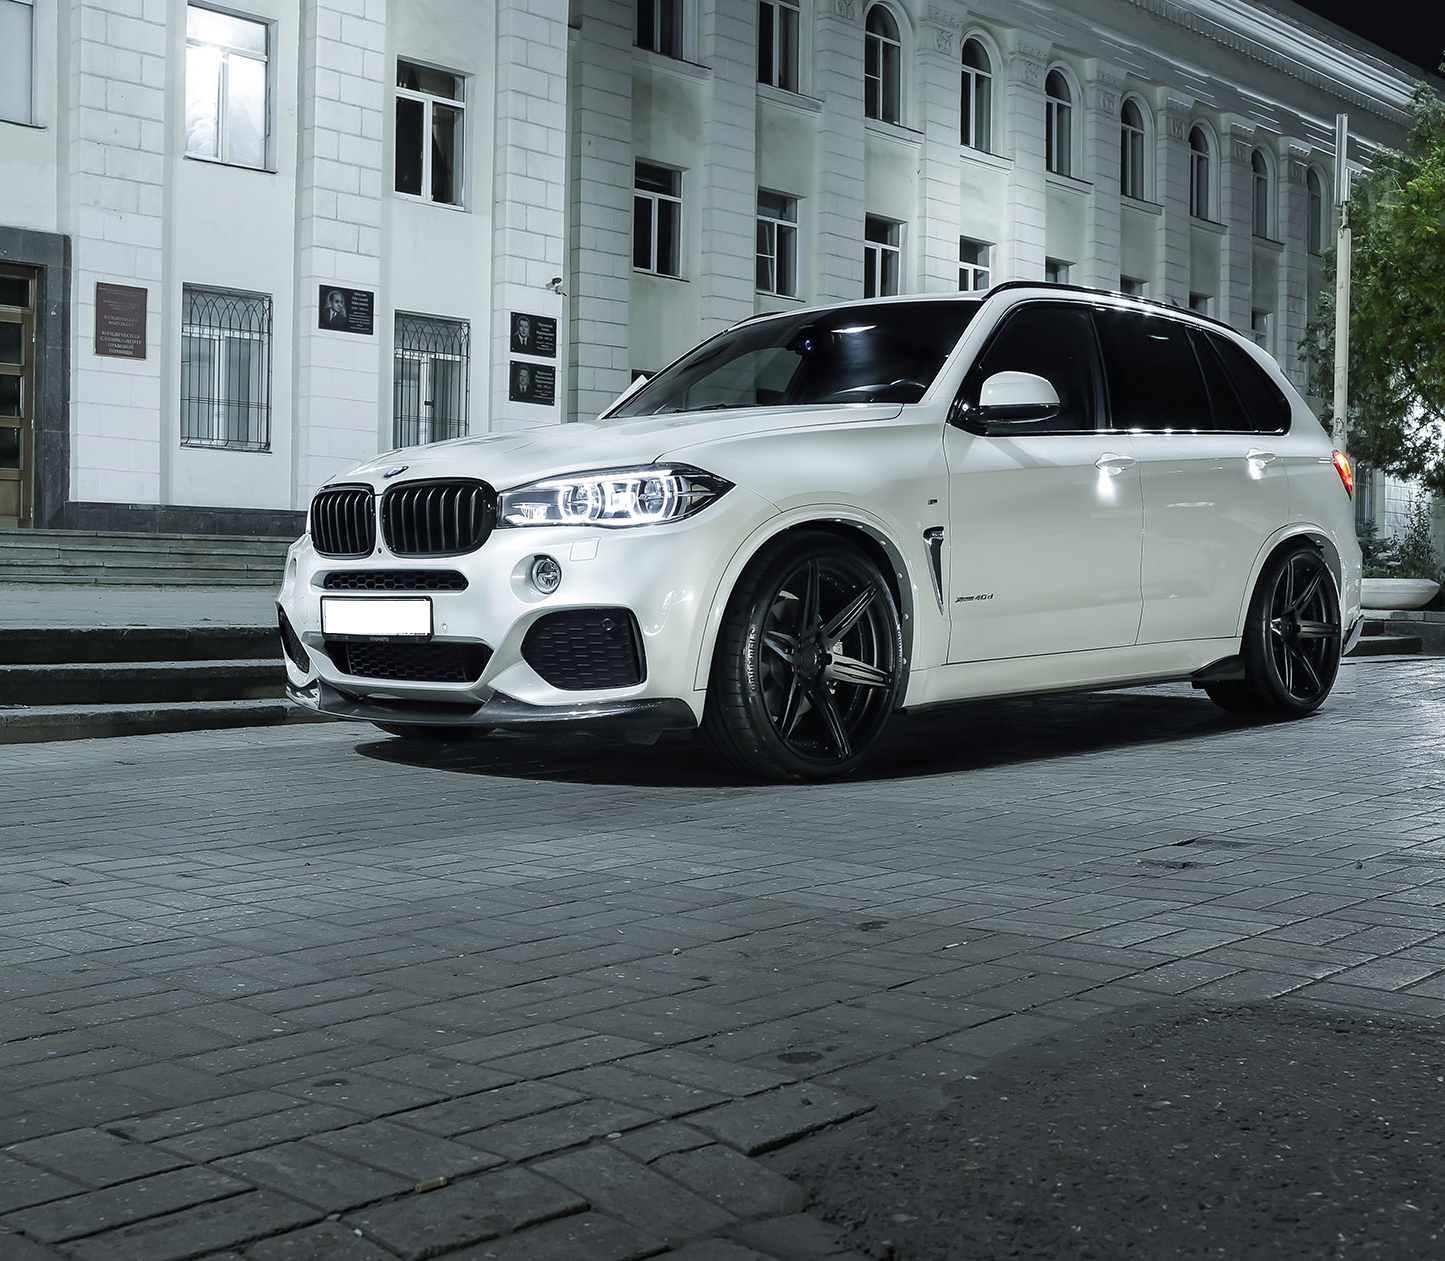 Image of a BMW x5 